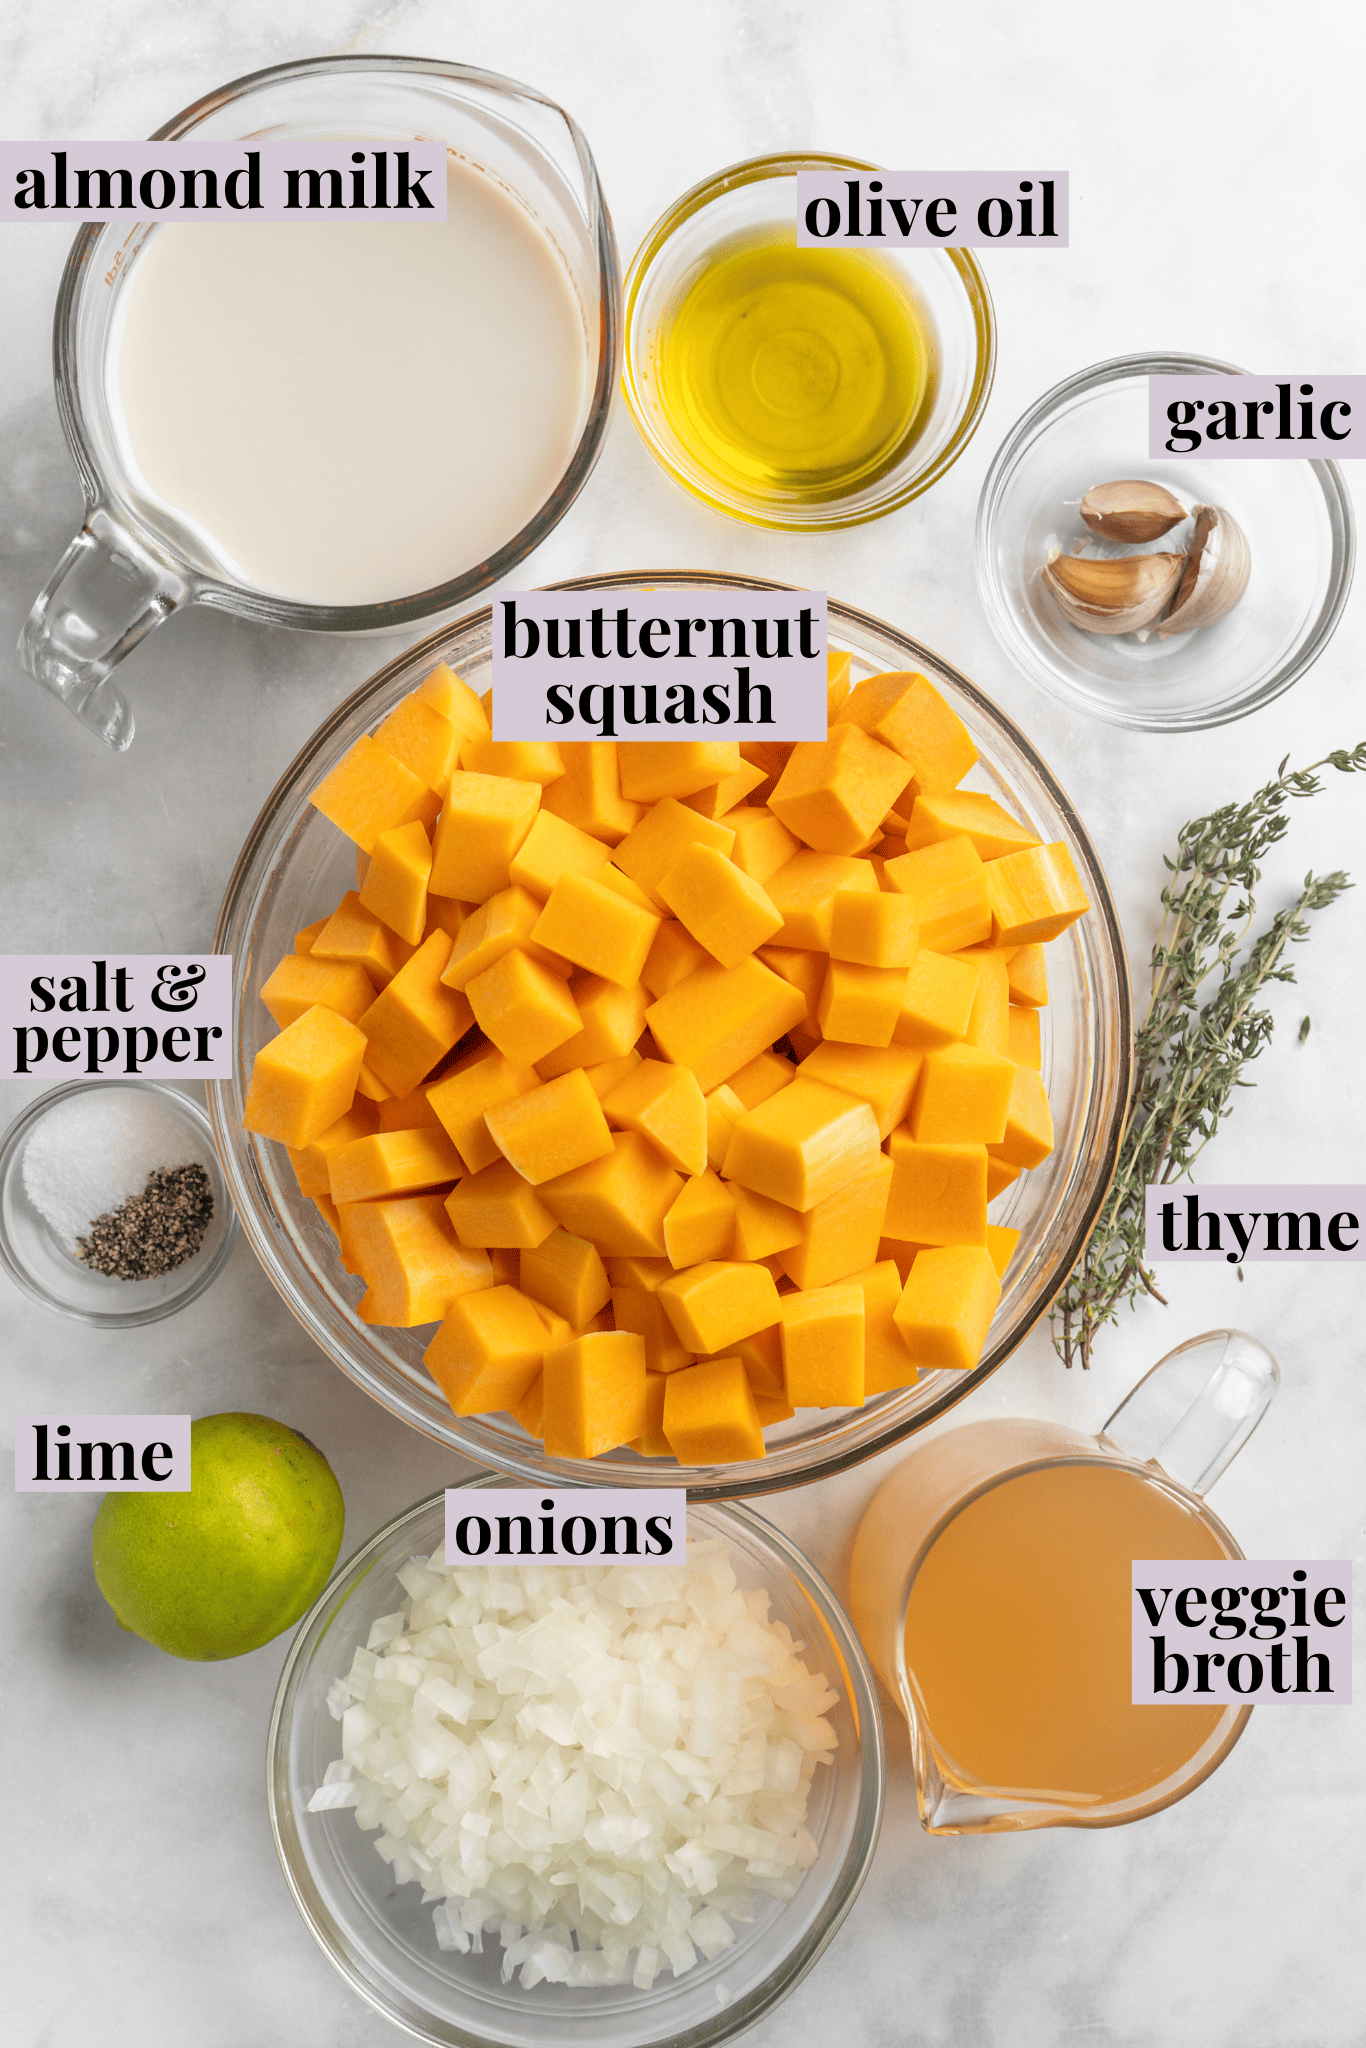 Overhead view of ingredients for butternut squash soup with labels